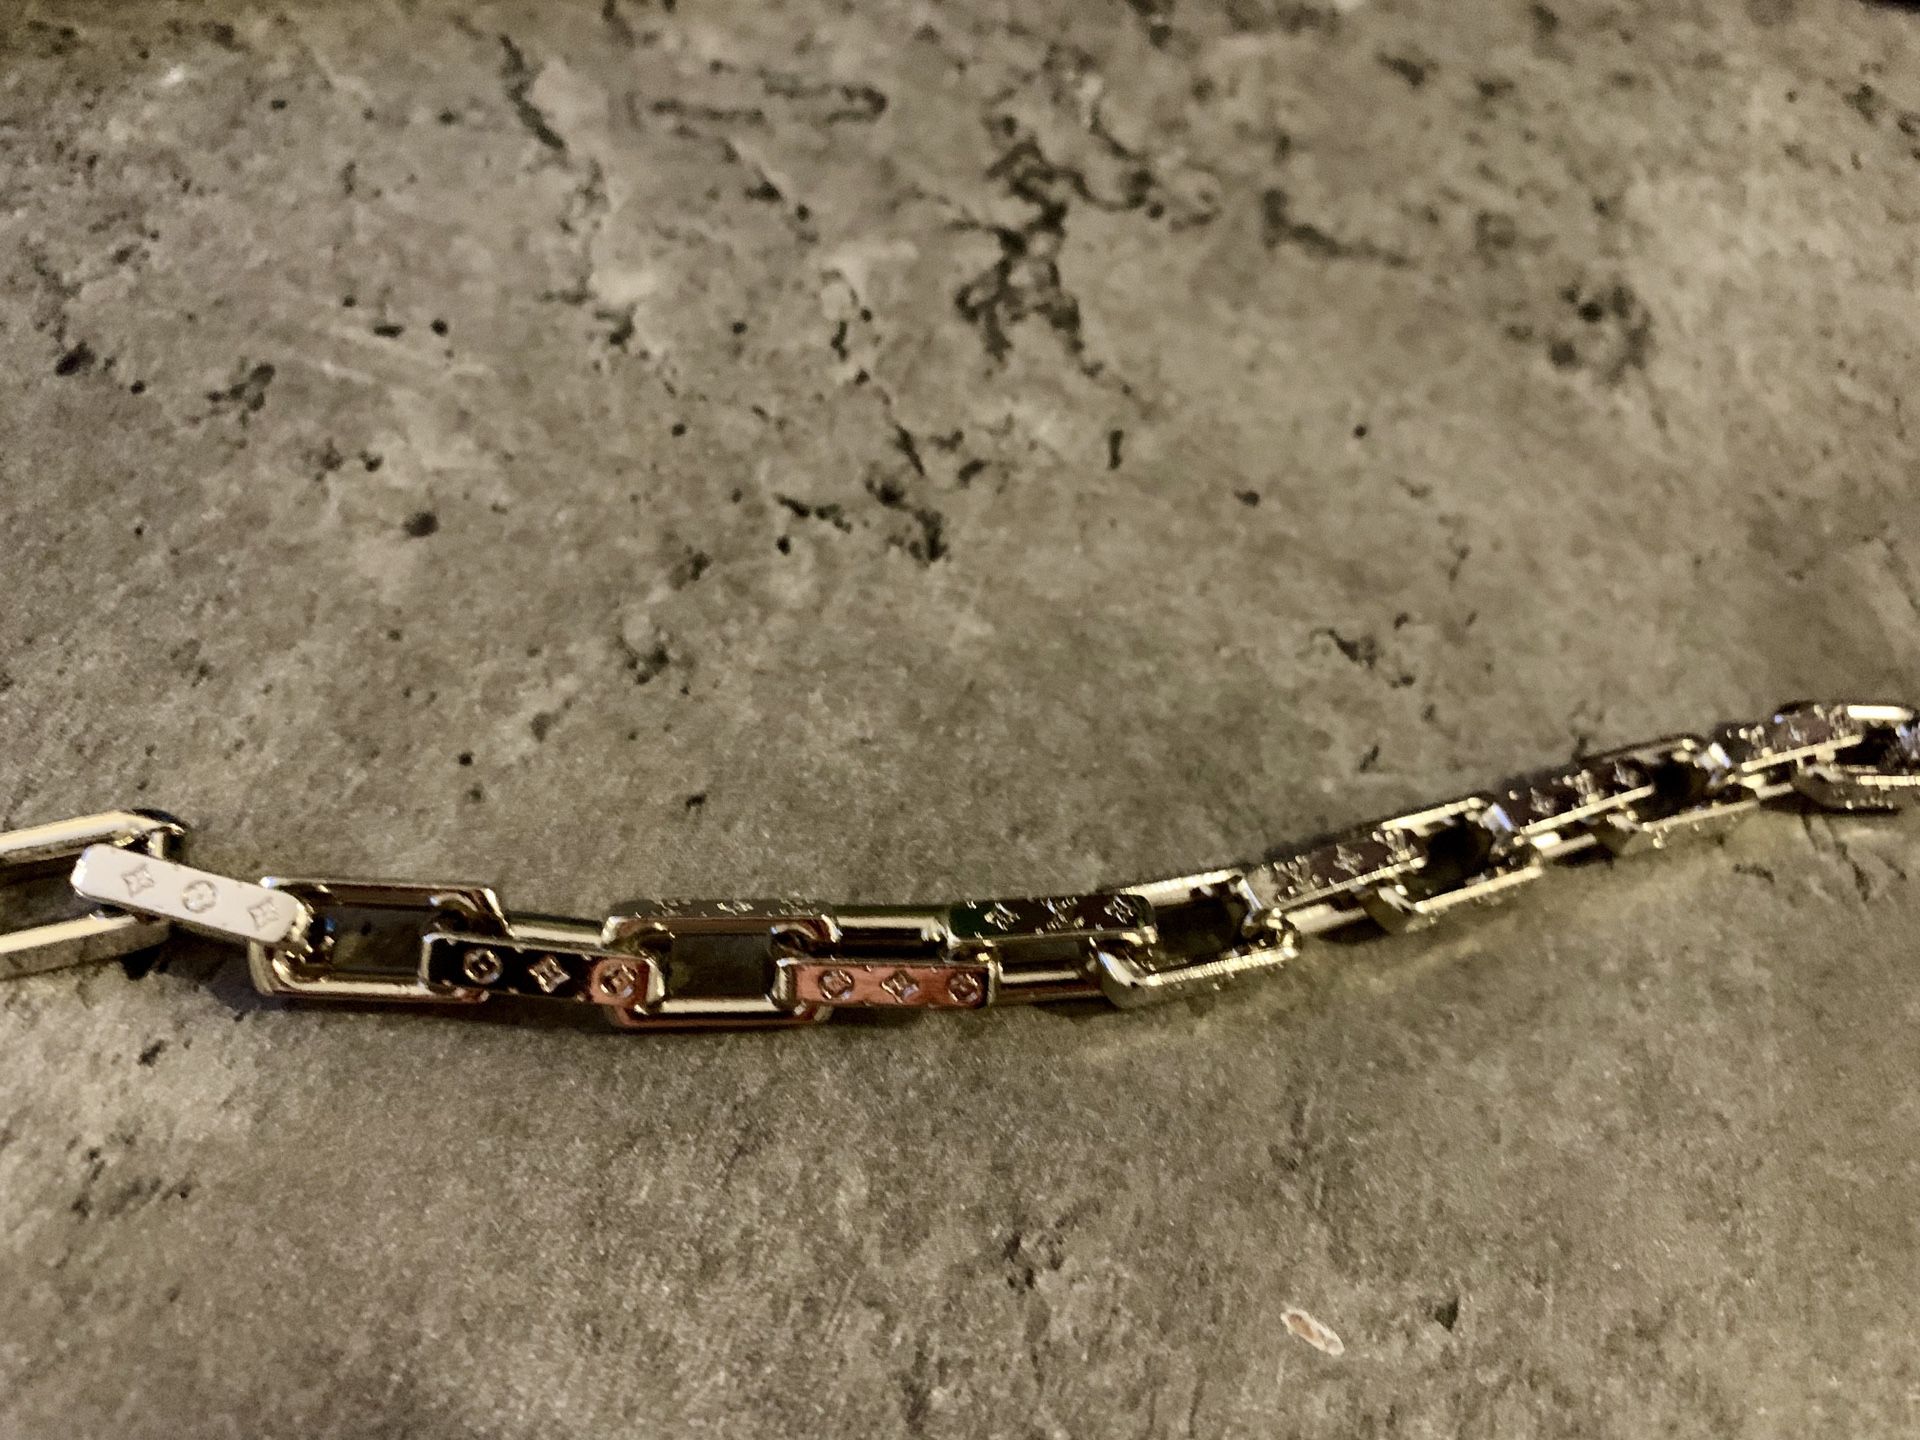 AUTHENTIC, like-new condition, Leather Gold Louis Vuitton Bracelet for Sale  in Fort Lauderdale, FL - OfferUp